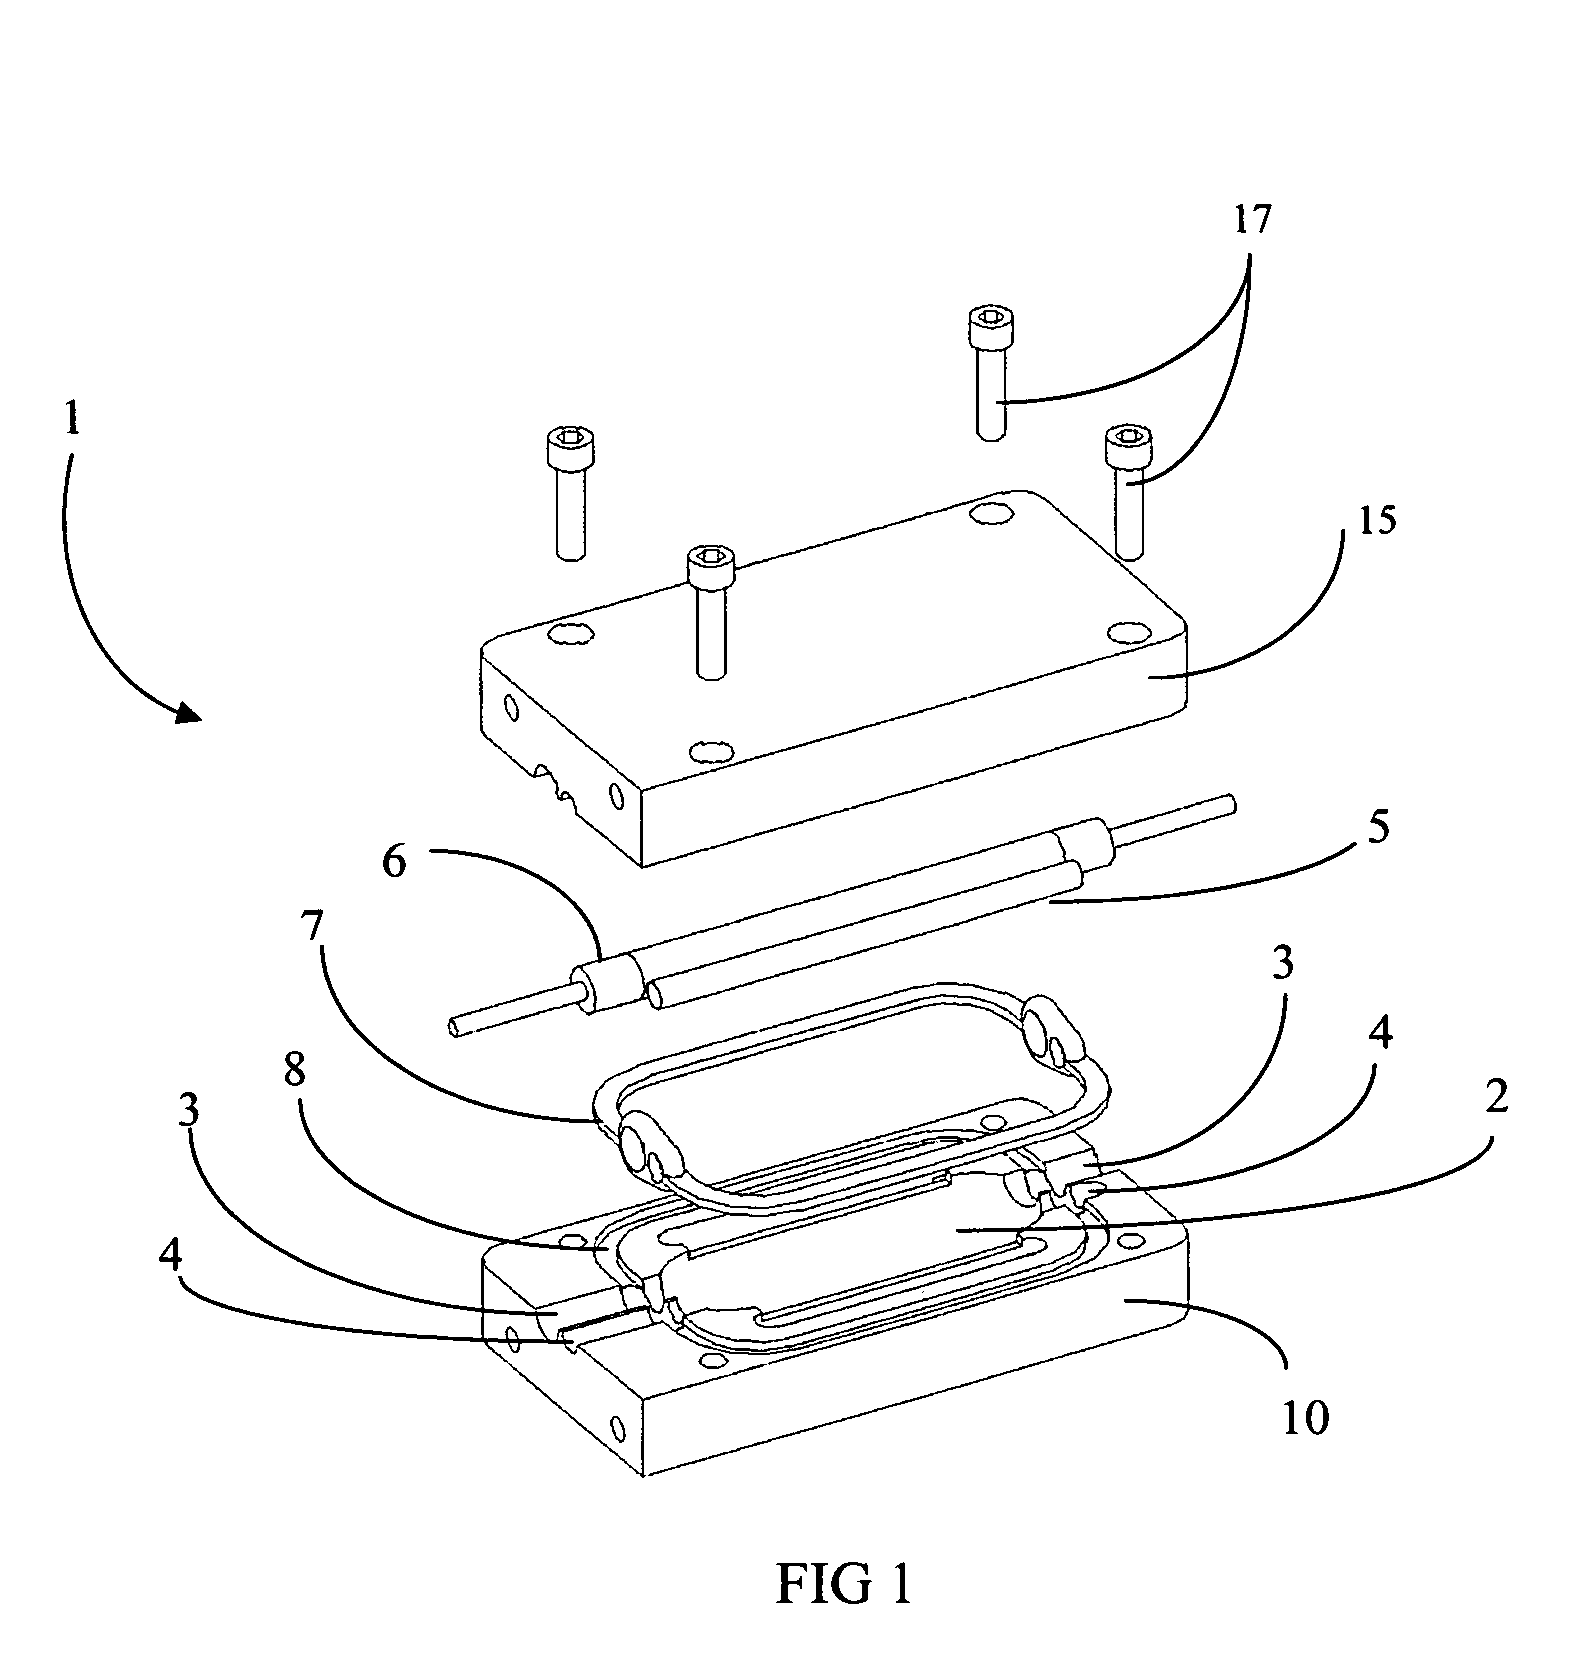 Integrated laser cavity with transverse flow cooling